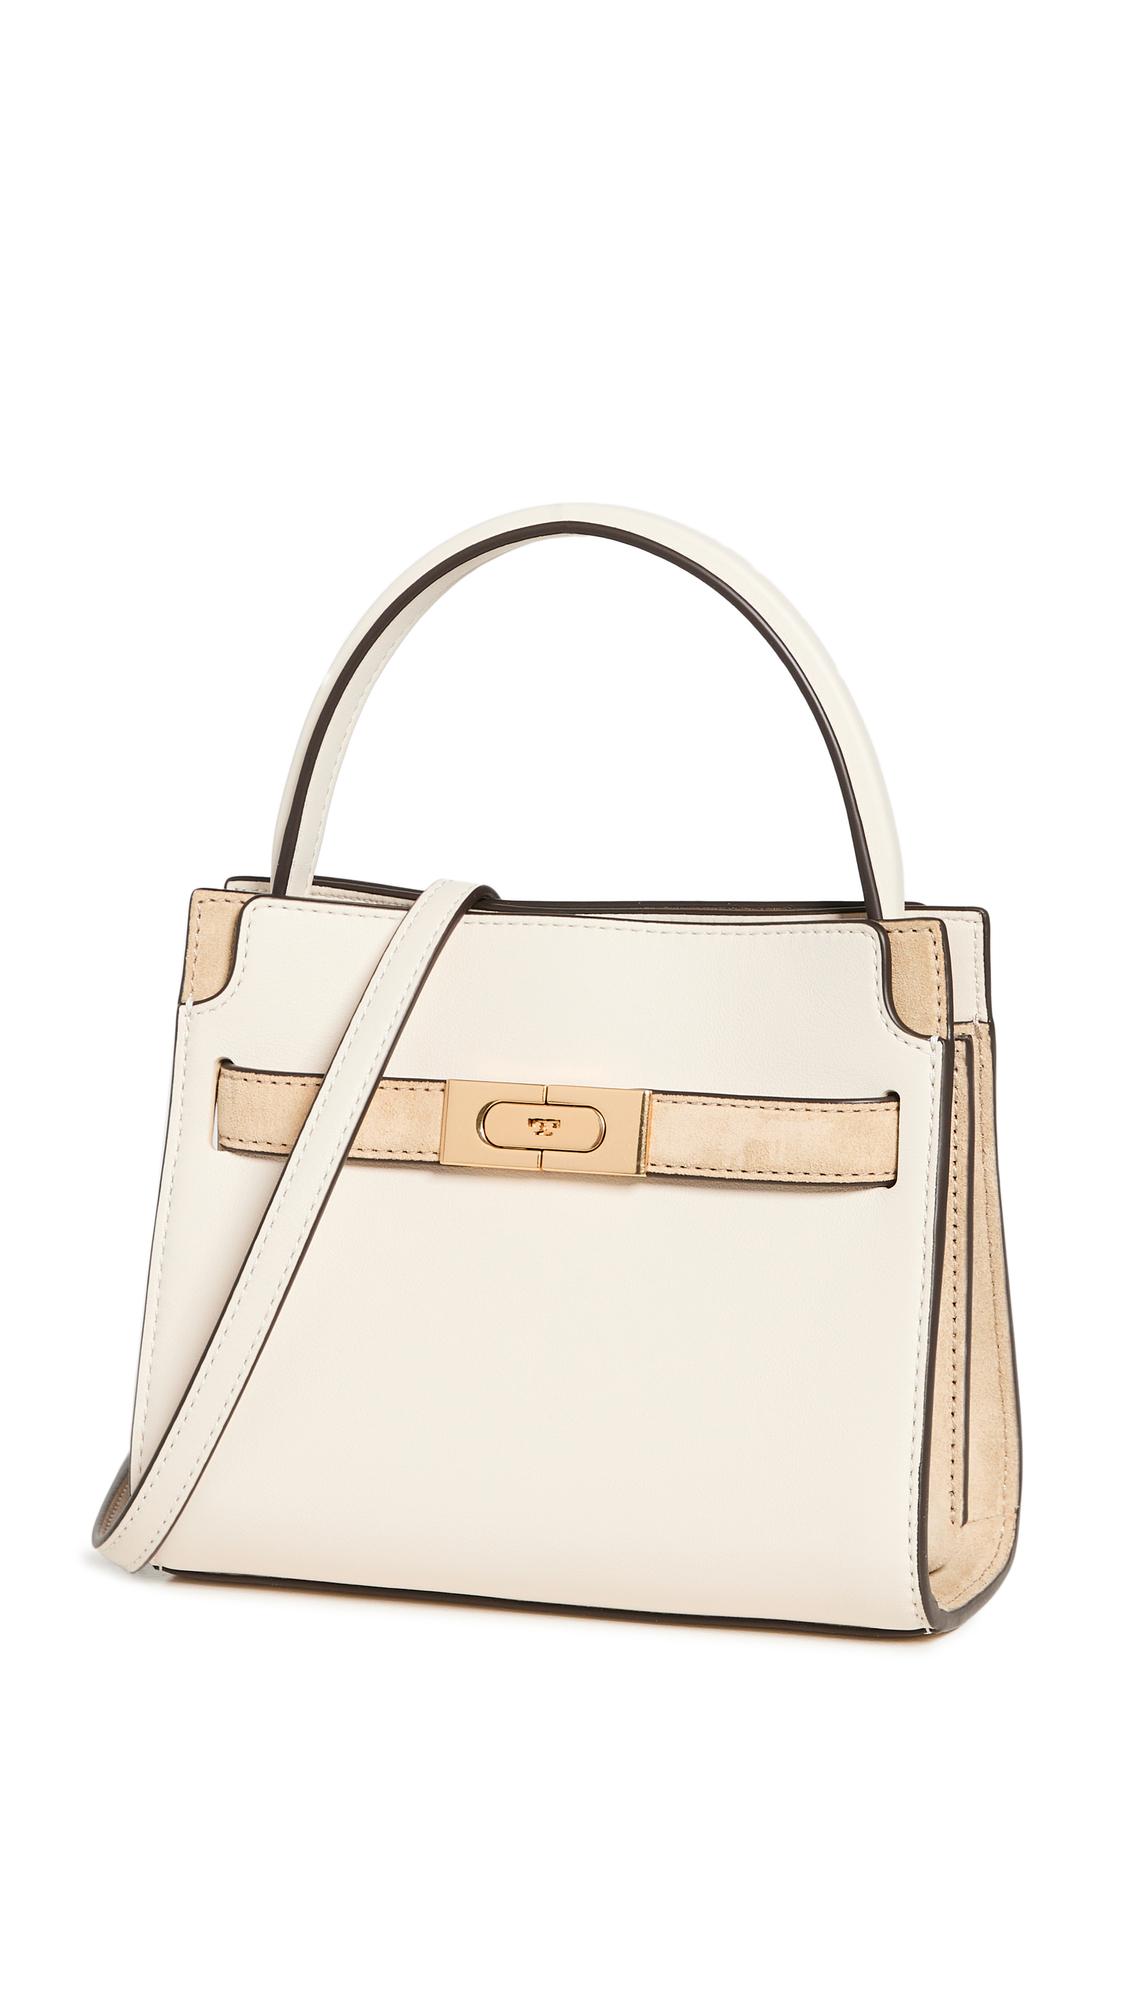 Tory Burch Lee Radziwill Petite Double Bag in Natural | Lyst